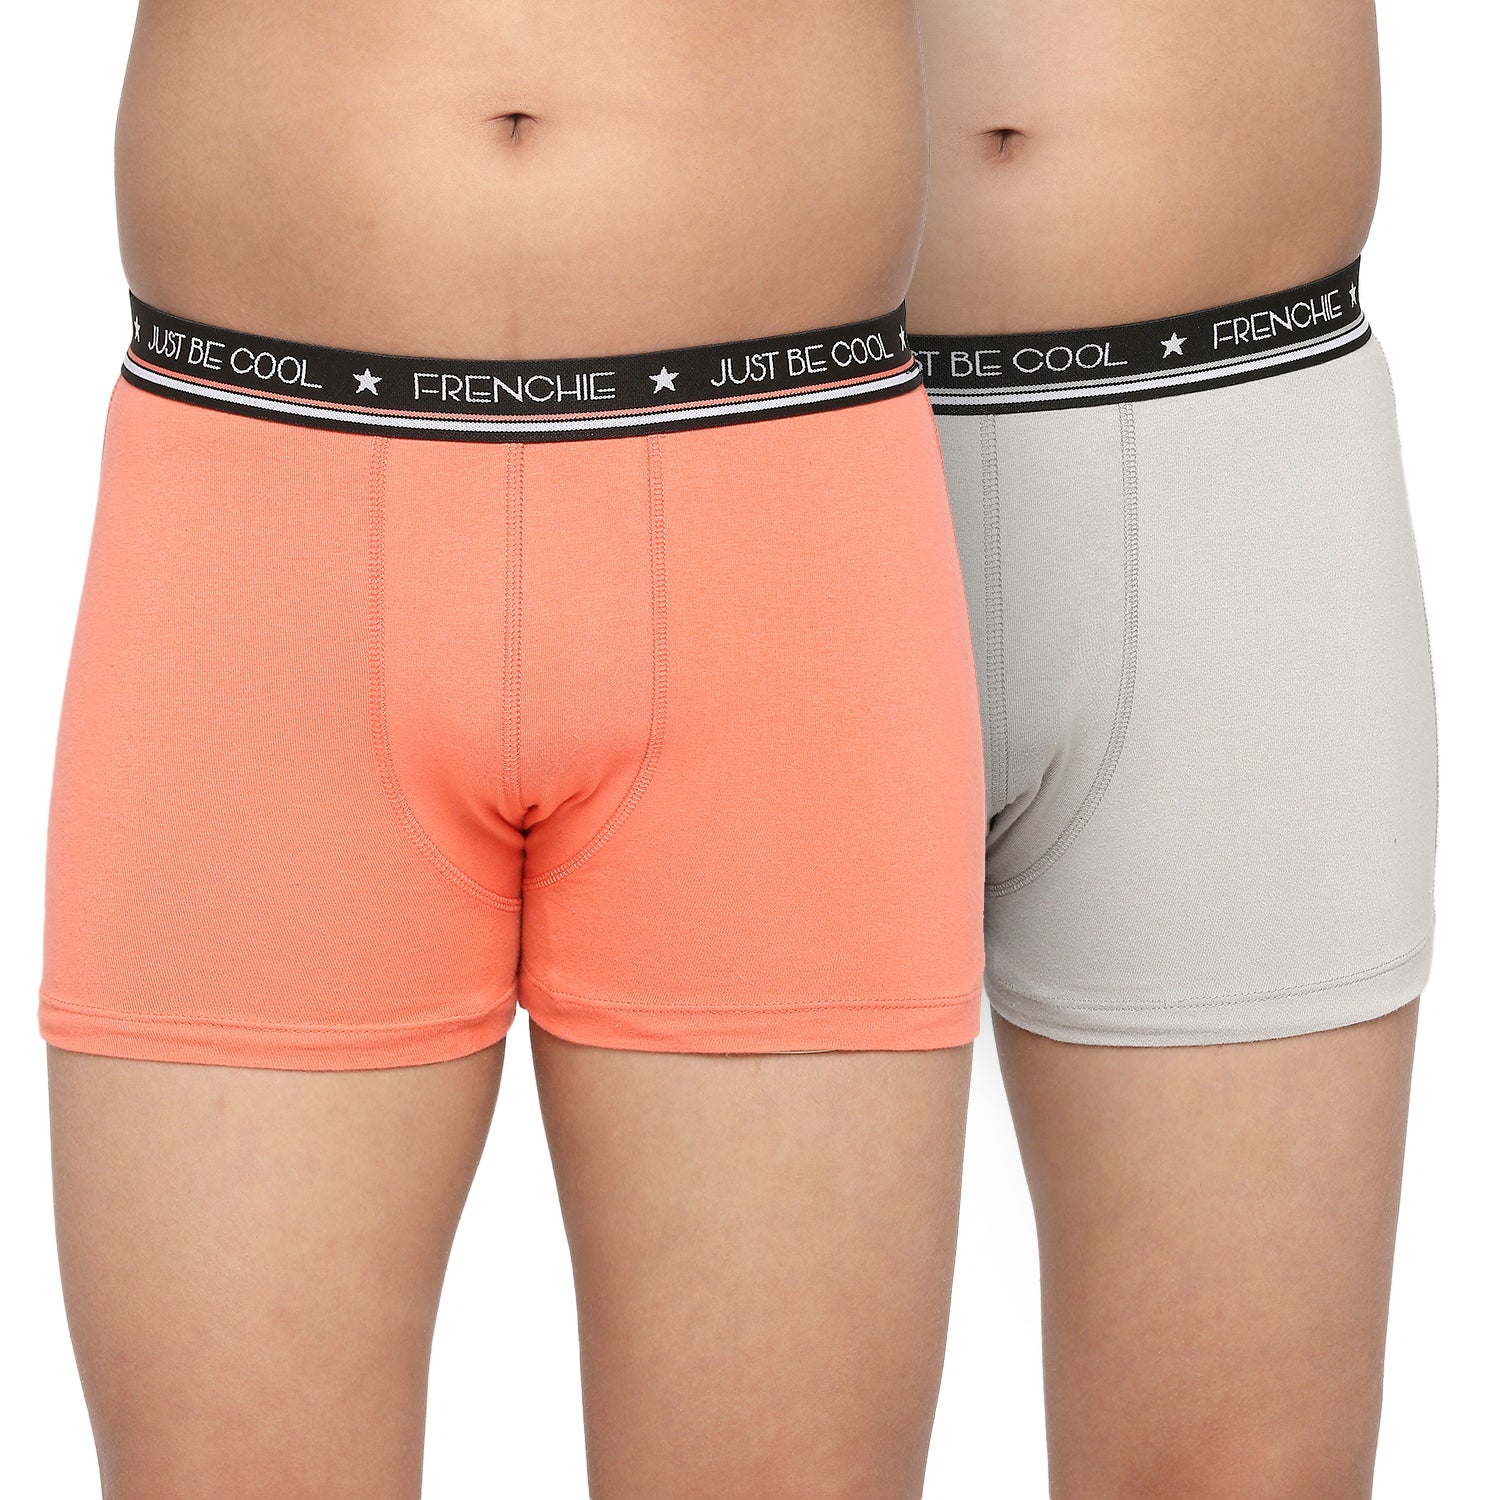 FRENCHIE Teenagers Cotton Trunk Gray and Peach - Pack of 2